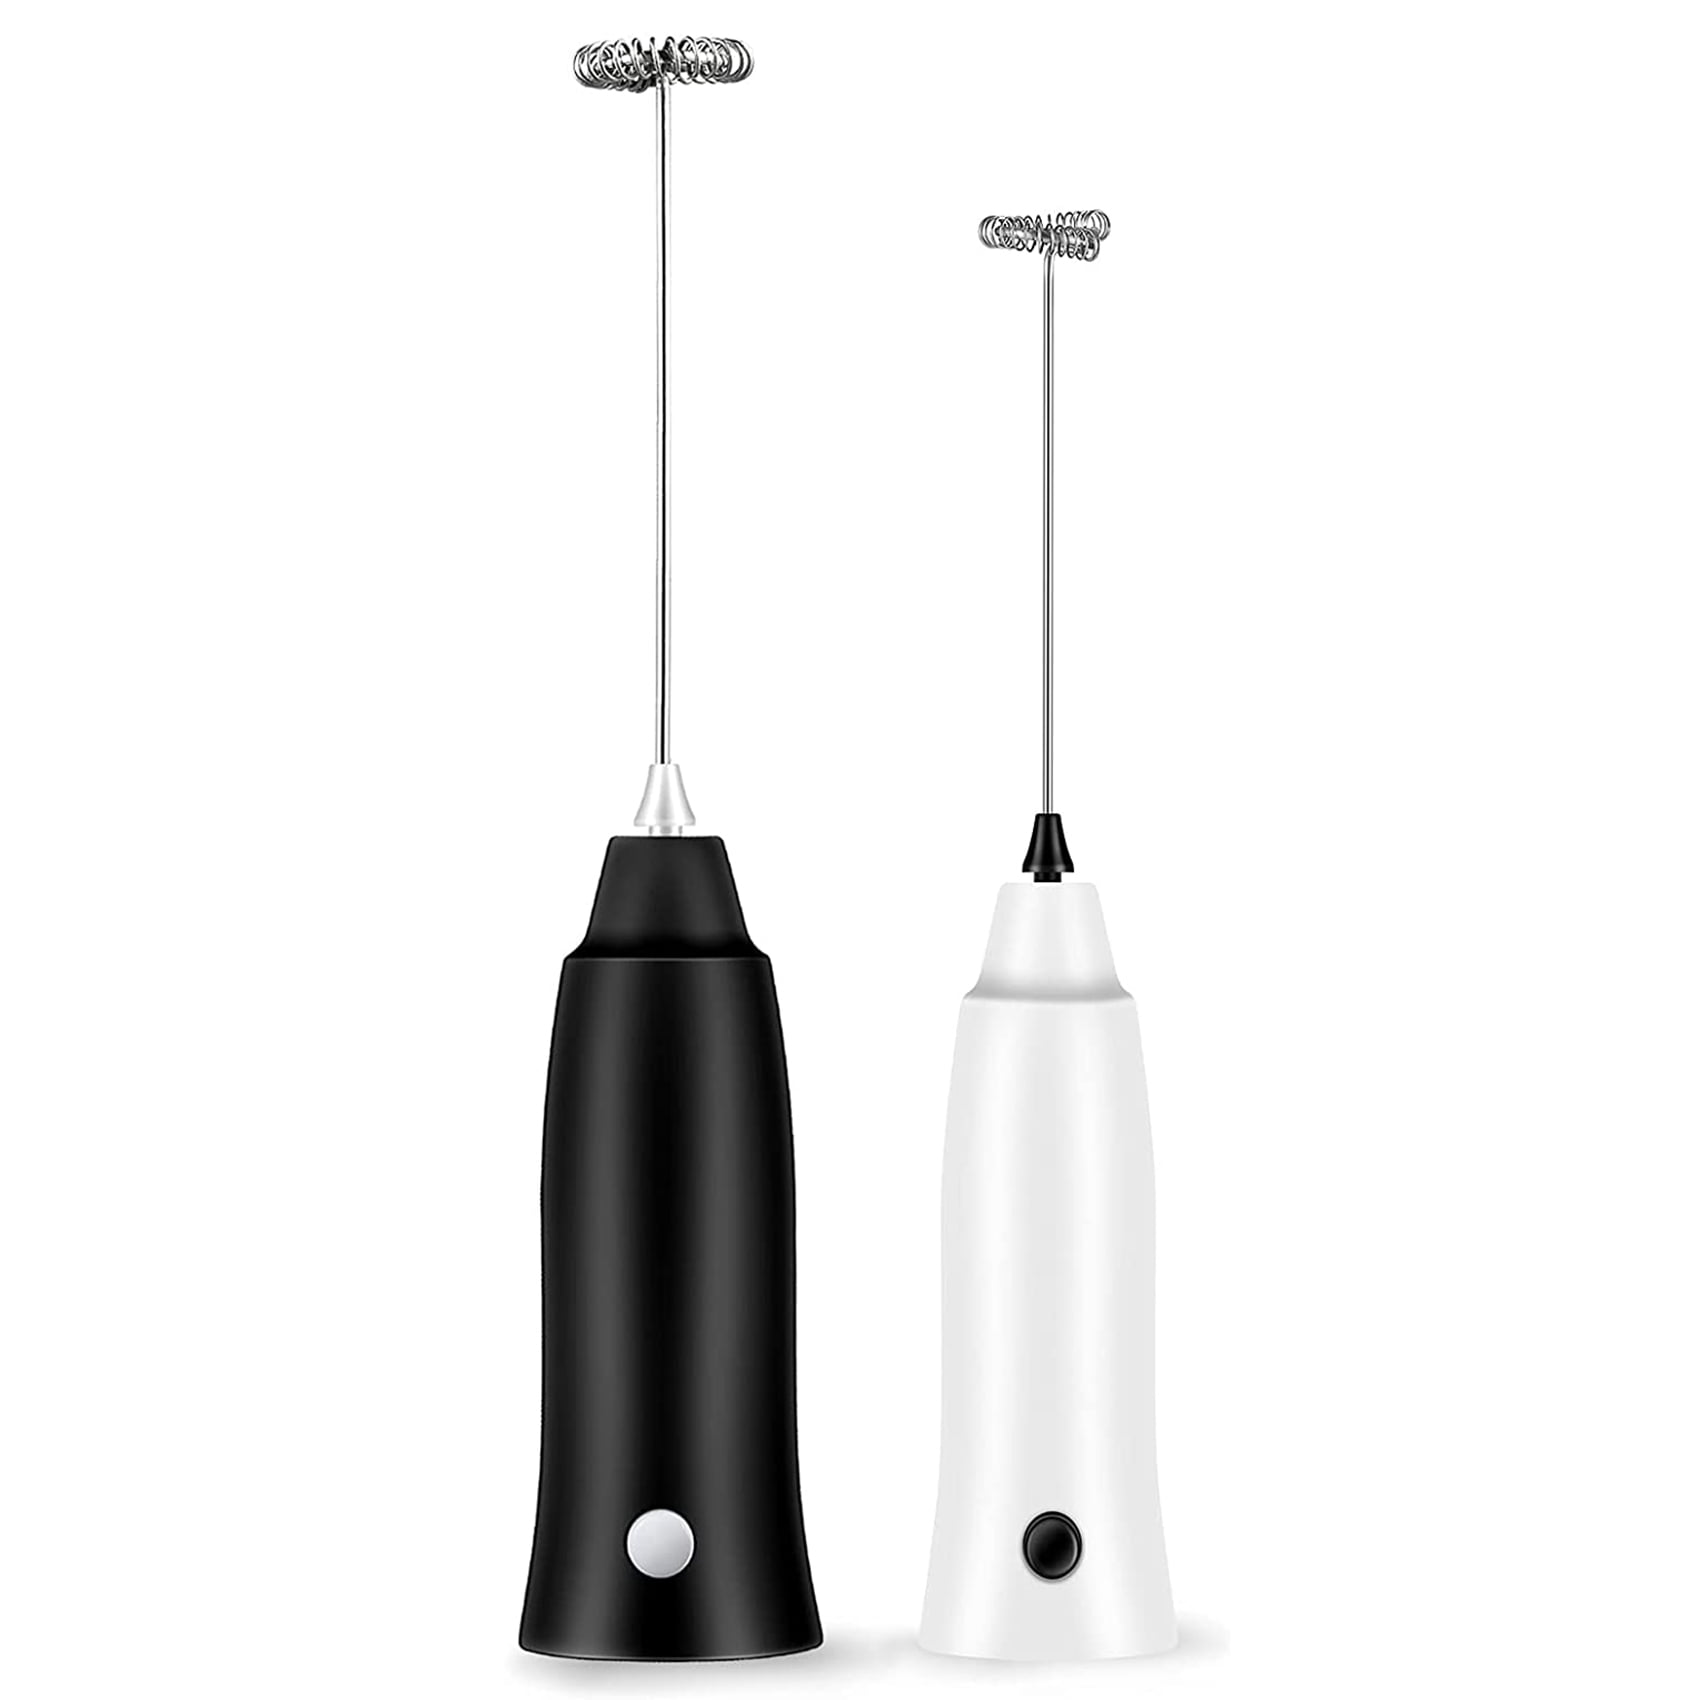 Real Simple Milk Frother and Whisk Set | USB Rechargeable Milk Frother with Stainless Steel Attachments and 5 Coffee Stencils | Perfect Handheld